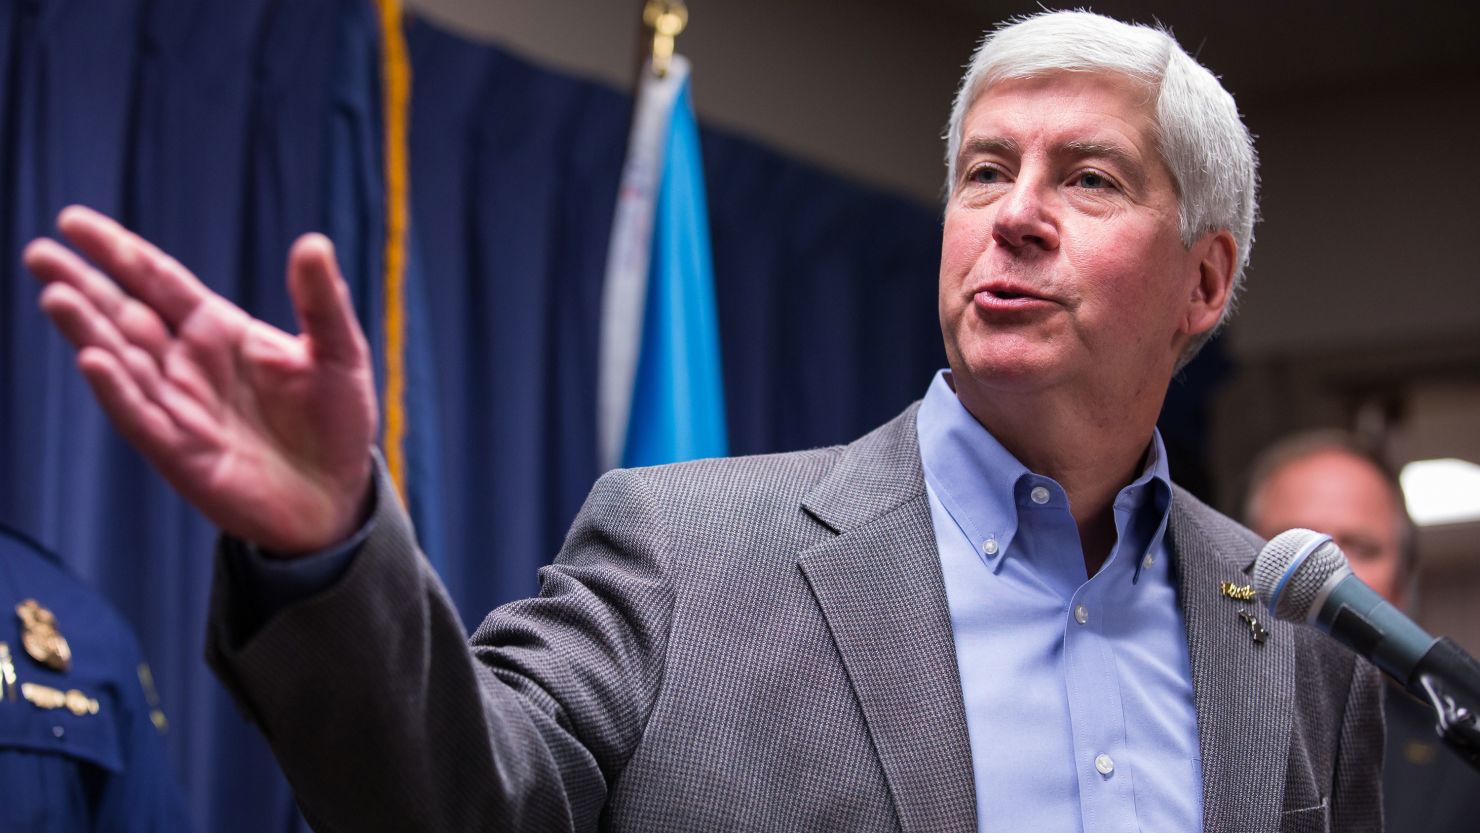 Former Michigan Gov. Rick Snyder speaks to the media regarding the status of the Flint water crisis on January 27, 2016, in Flint, Michigan.  